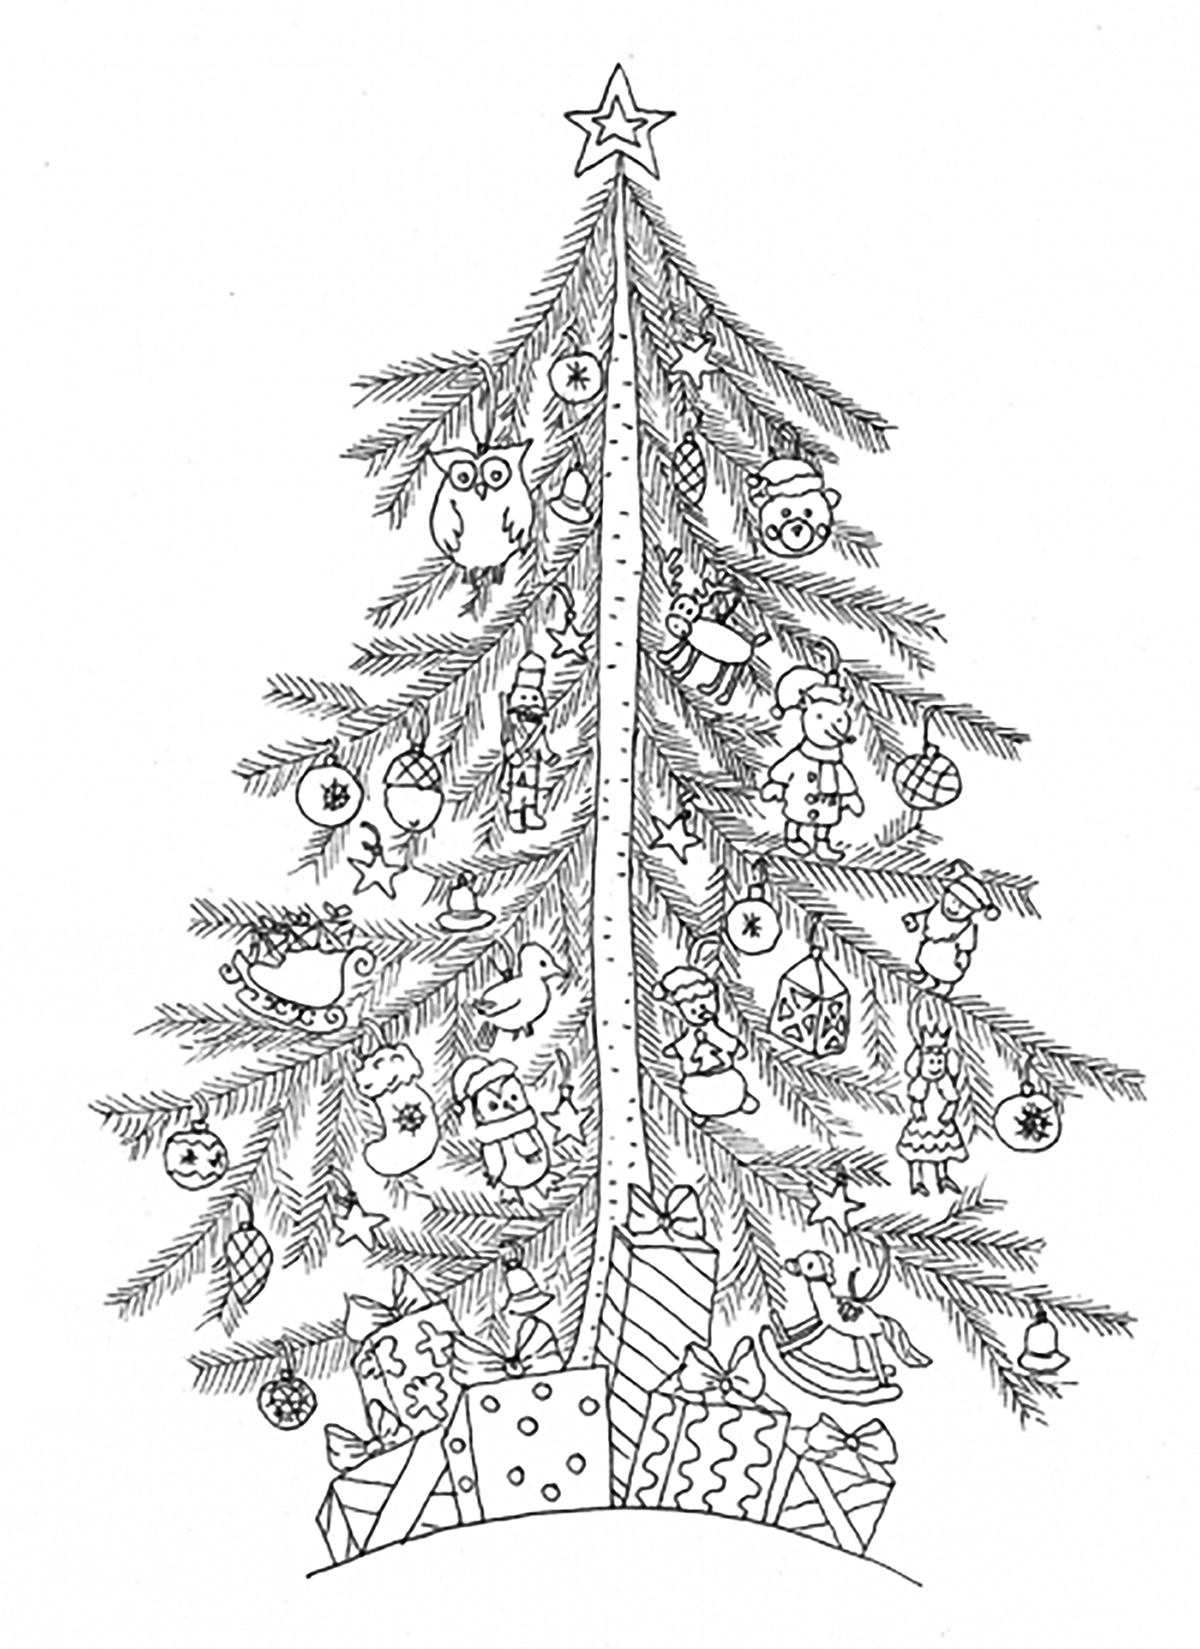 Download Christmas tree - Christmas Coloring pages for kids to print & color